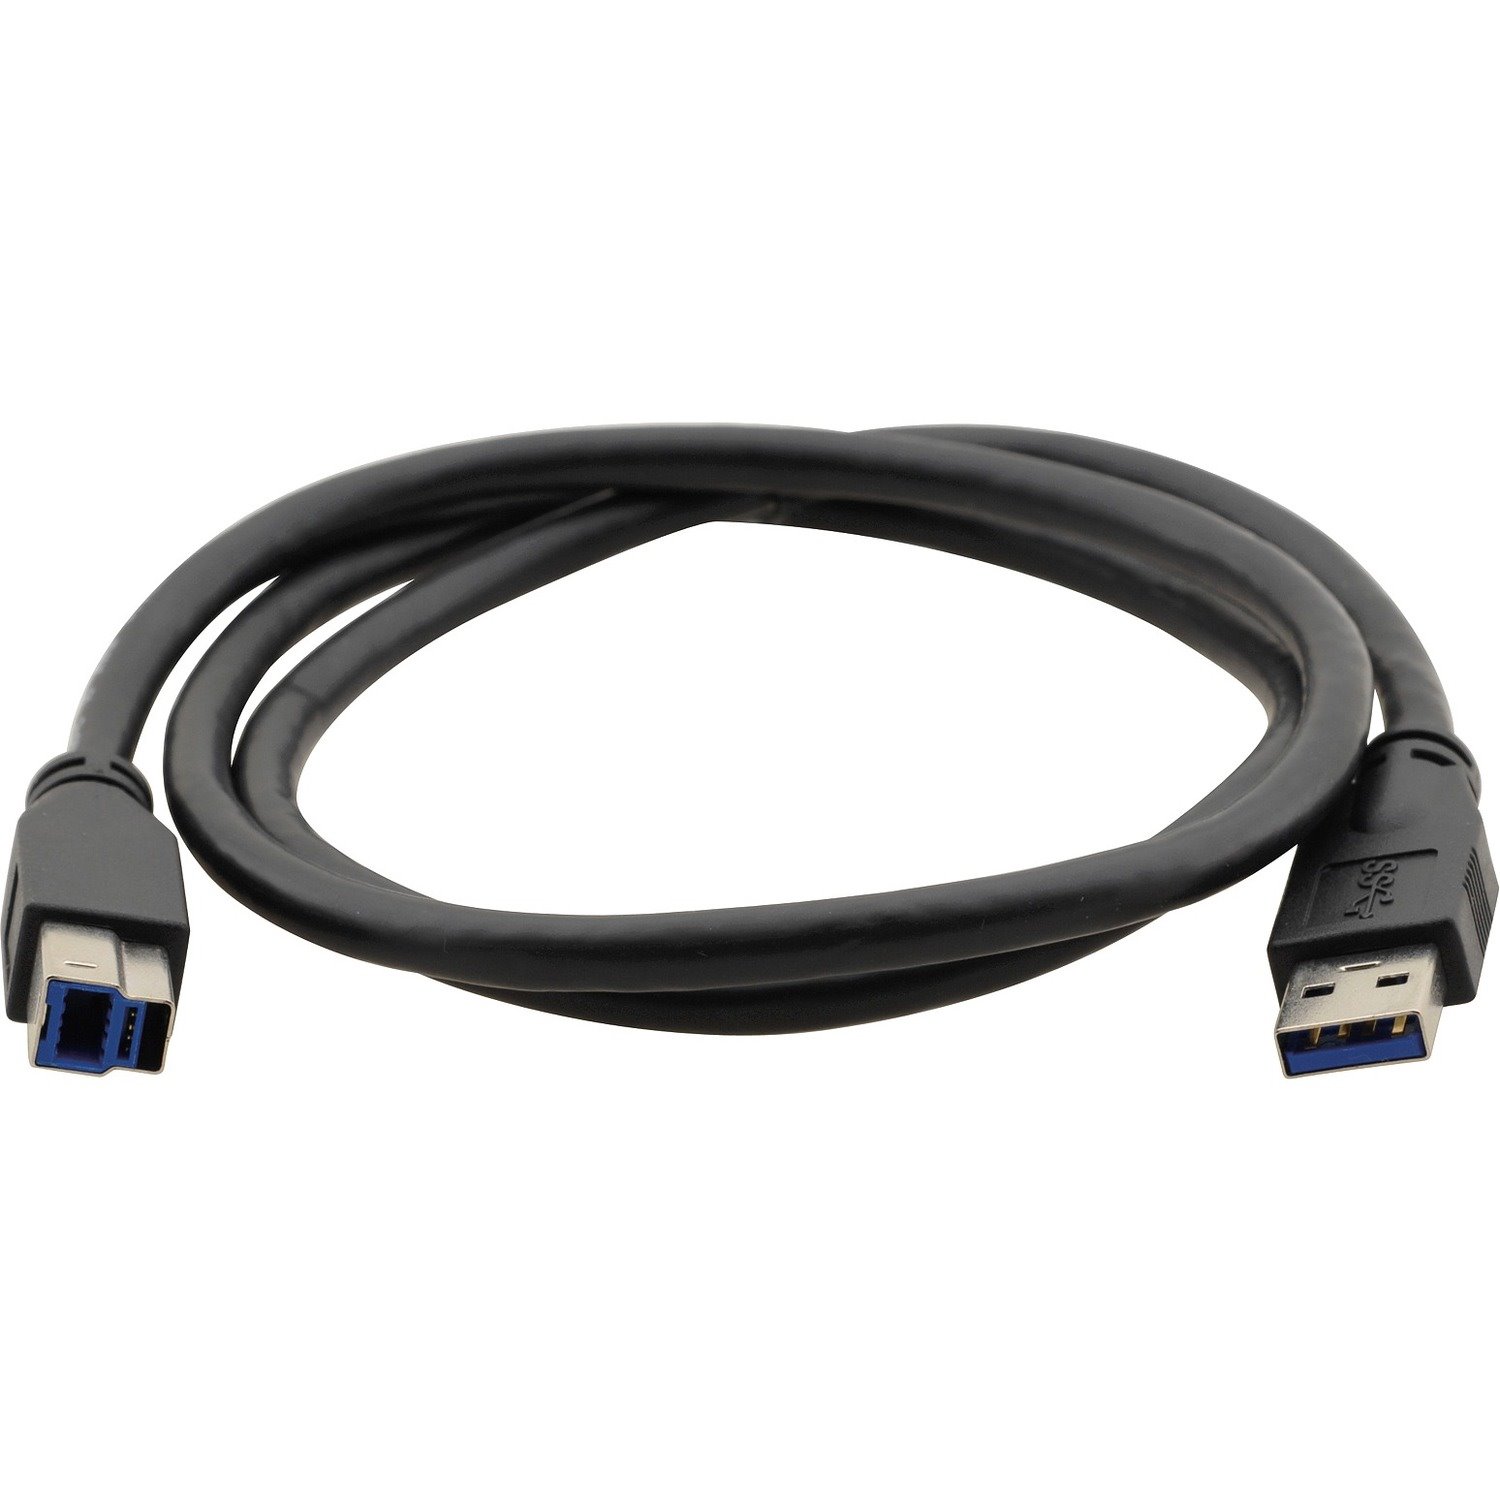 Kramer USB-A to USB-B 3.0 Cable